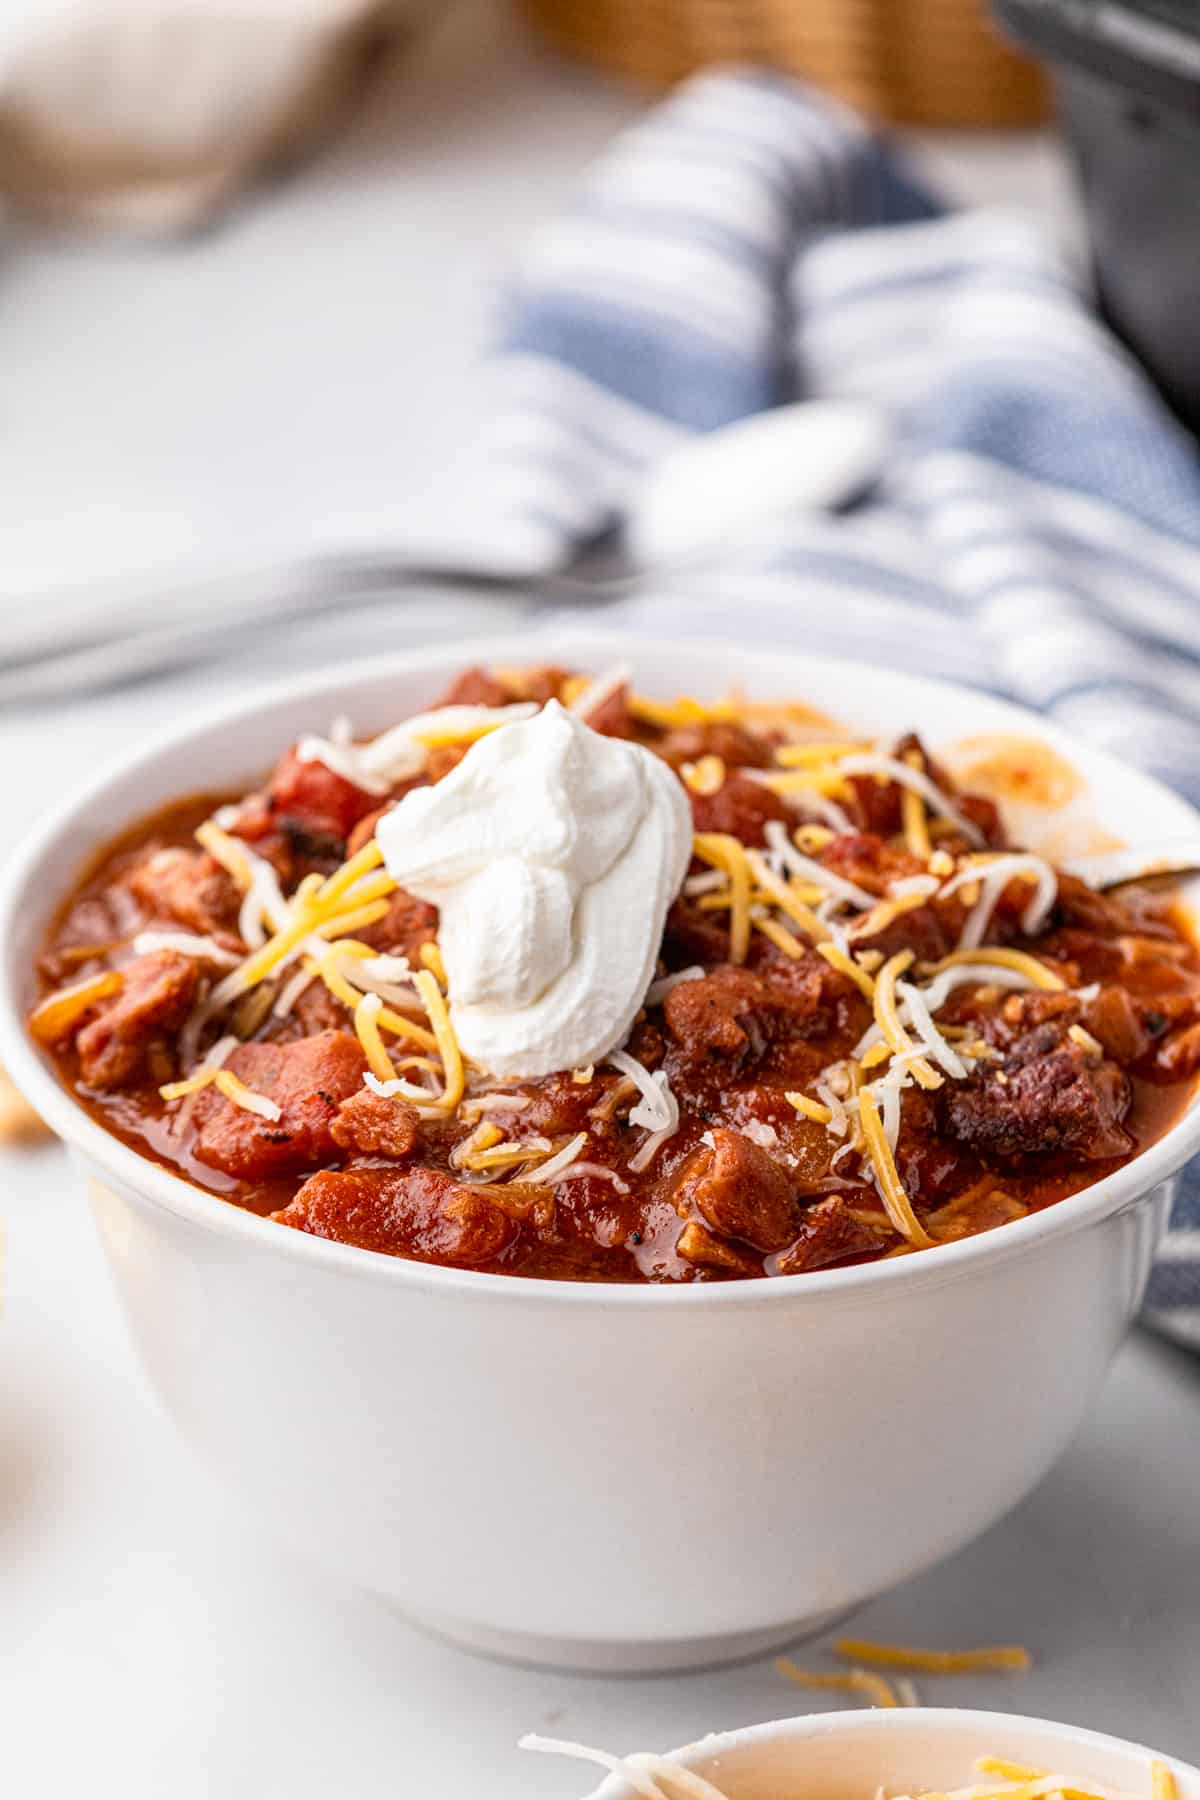 Smoked Brisket Chili in bowl with sour cream and shredded cheese toppings